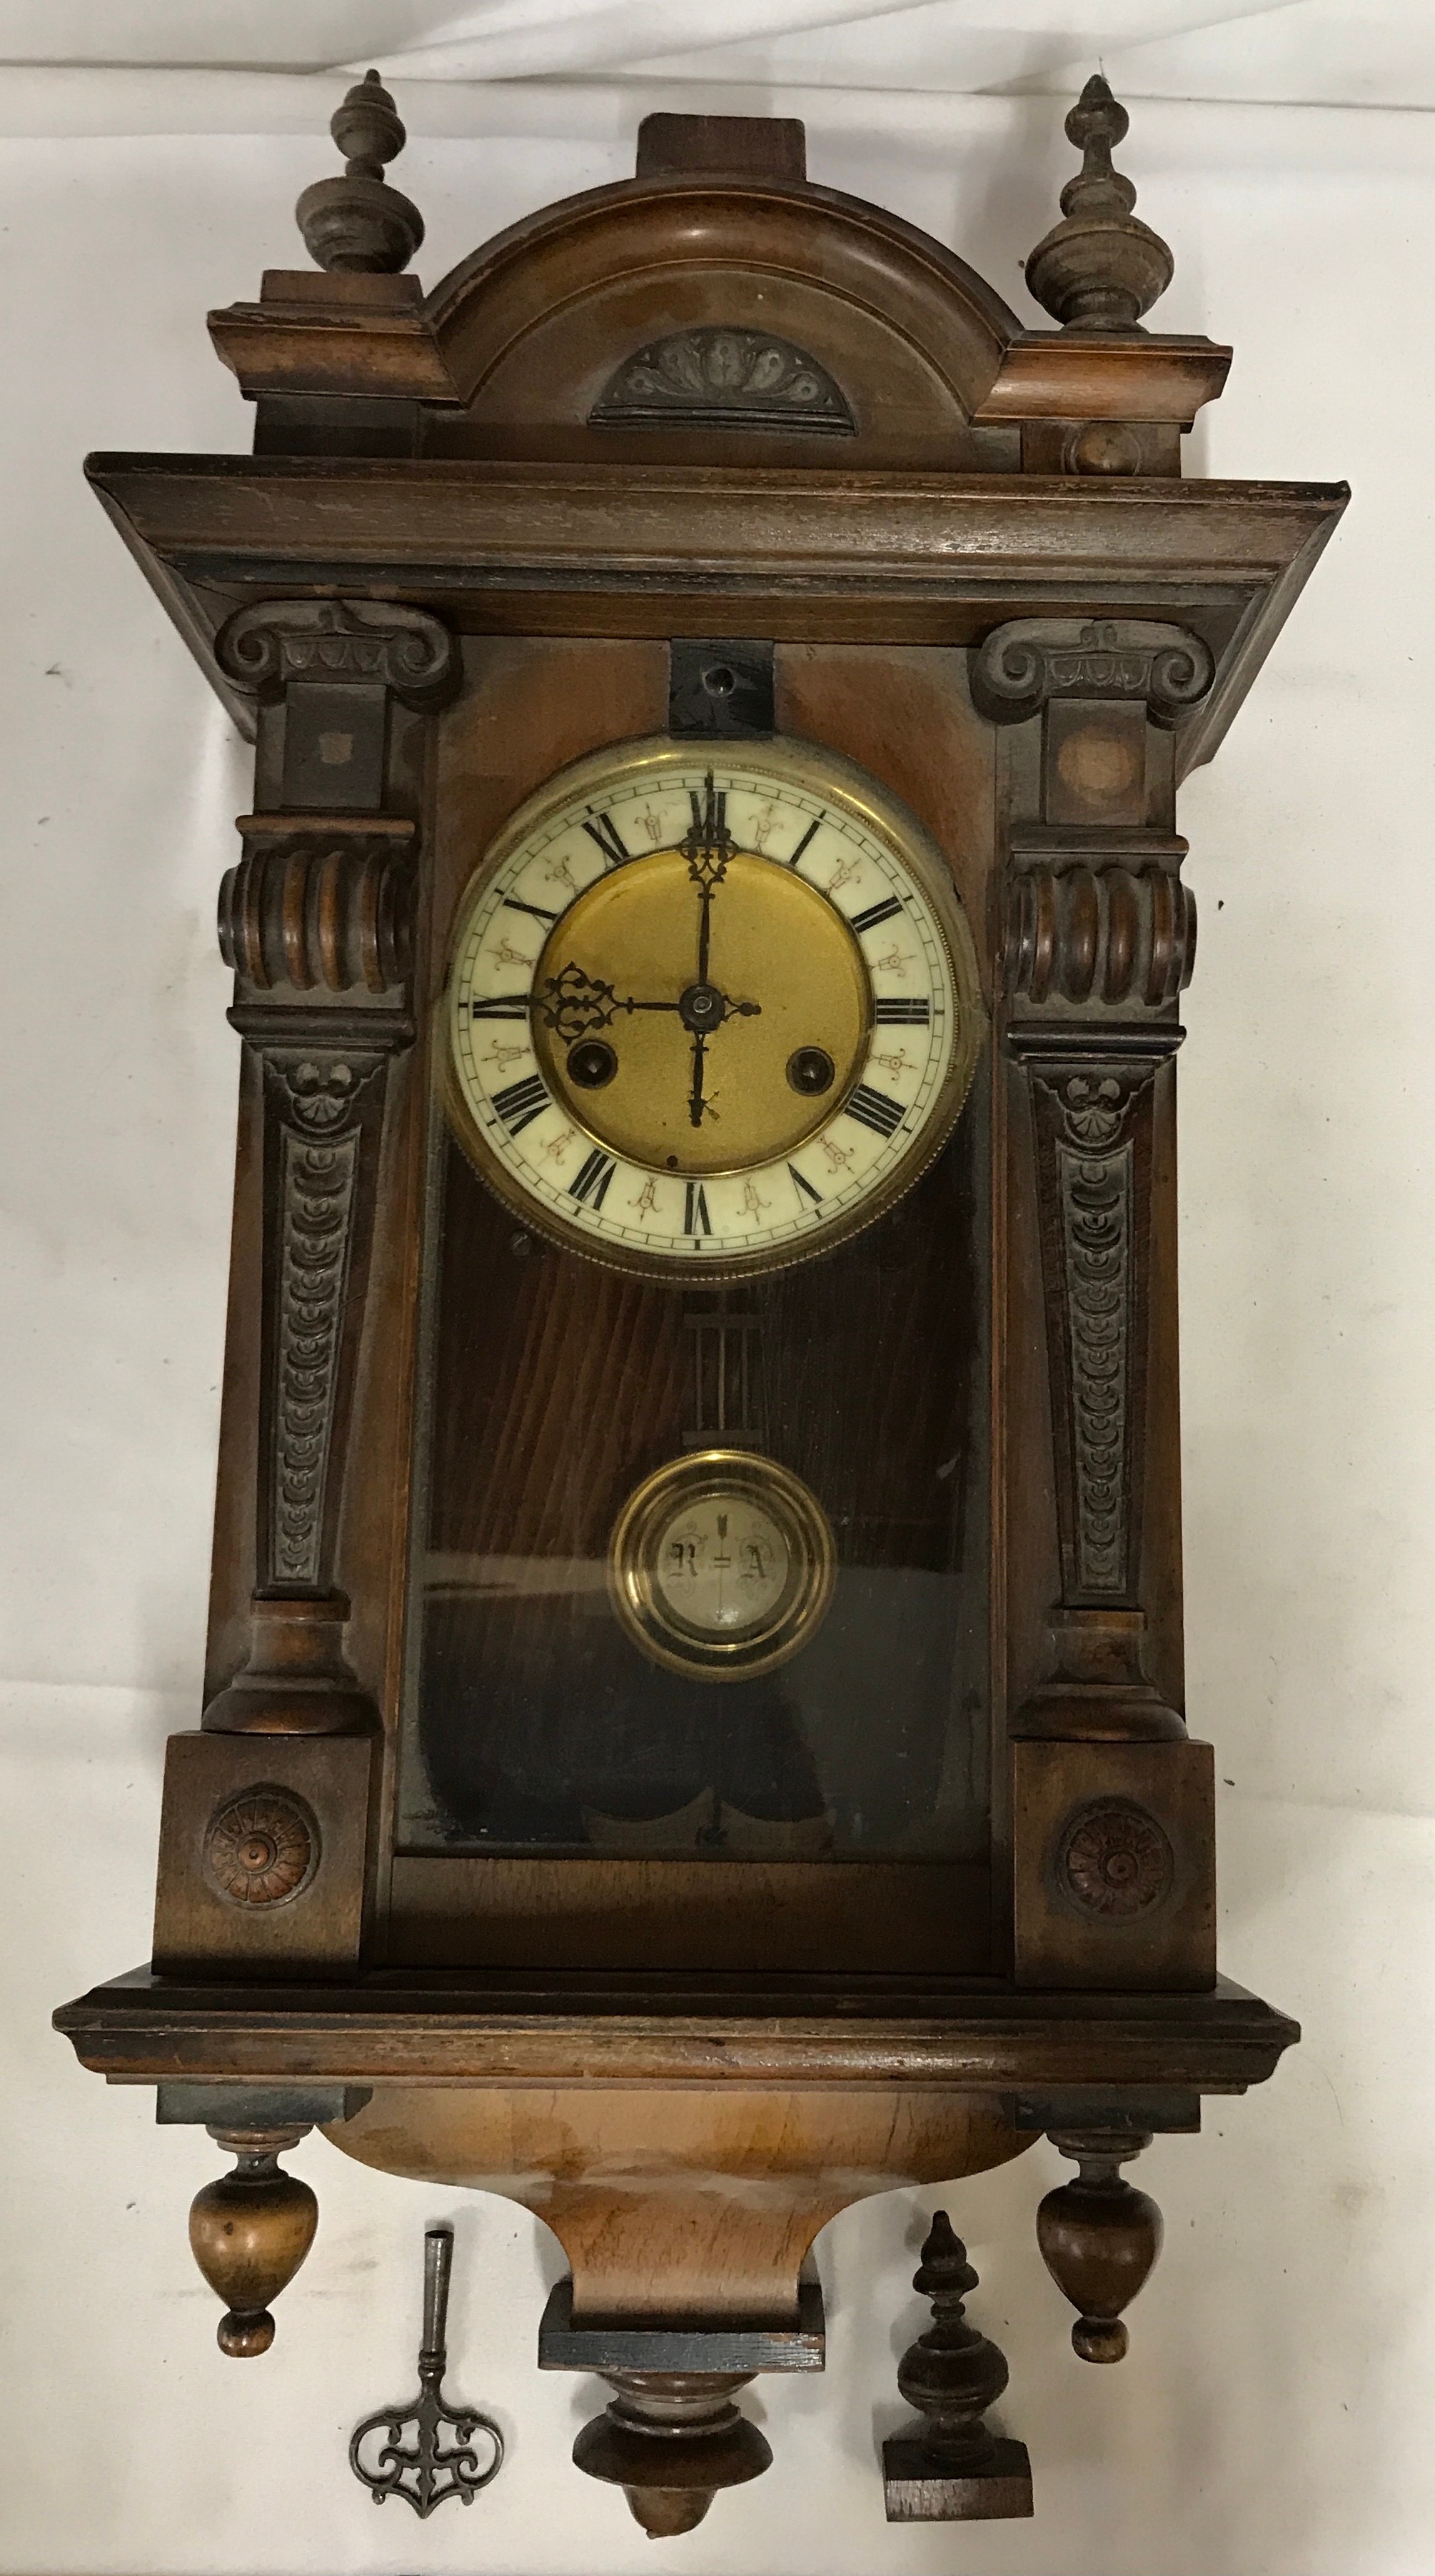 A wall clock with R A marked on pendulum with key. Approx. 60 h x 16 d x 30cm w.